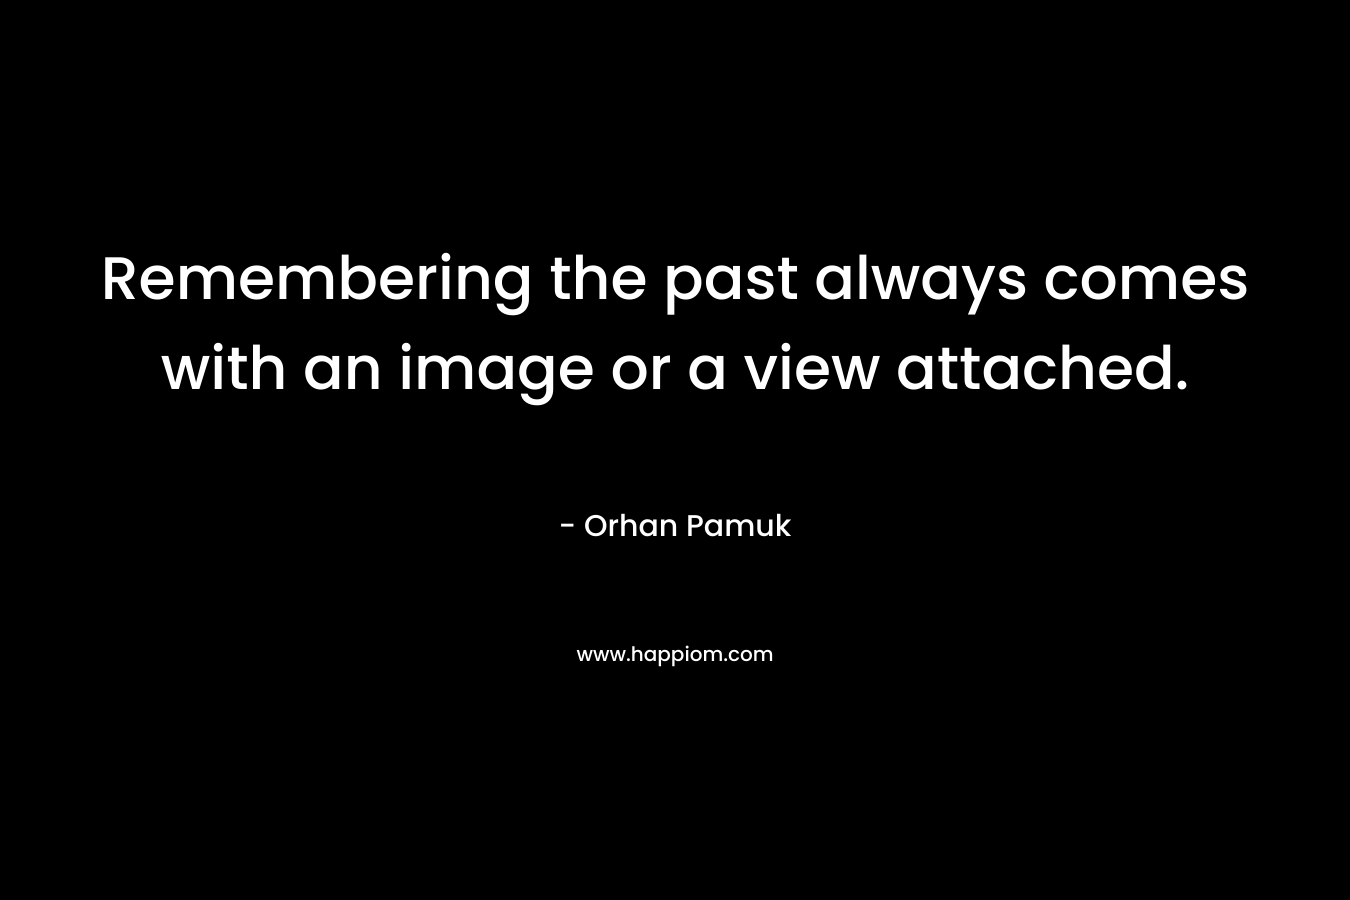 Remembering the past always comes with an image or a view attached. – Orhan Pamuk